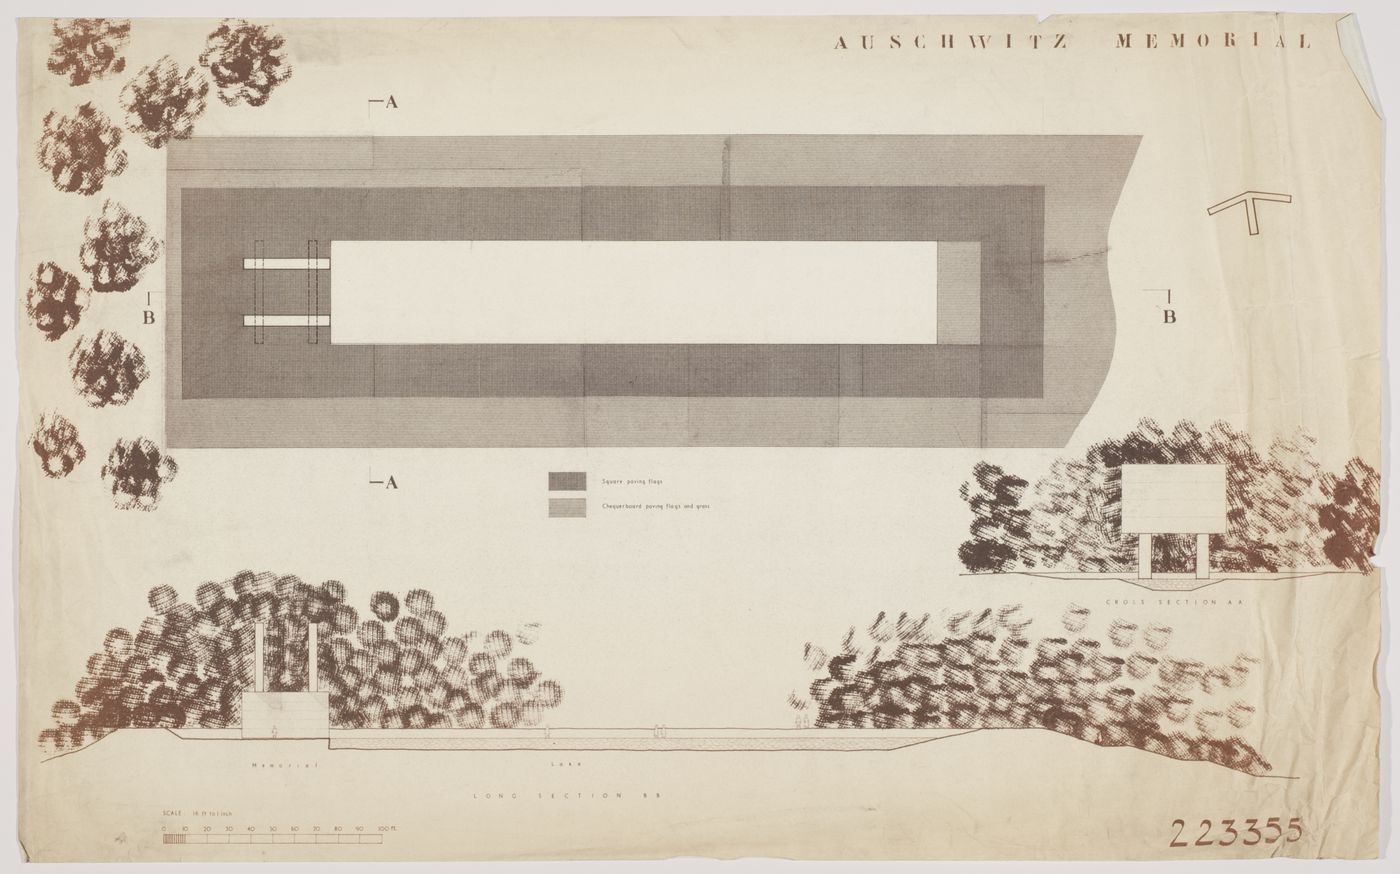 Plan and sections for Auschwitz Memorial